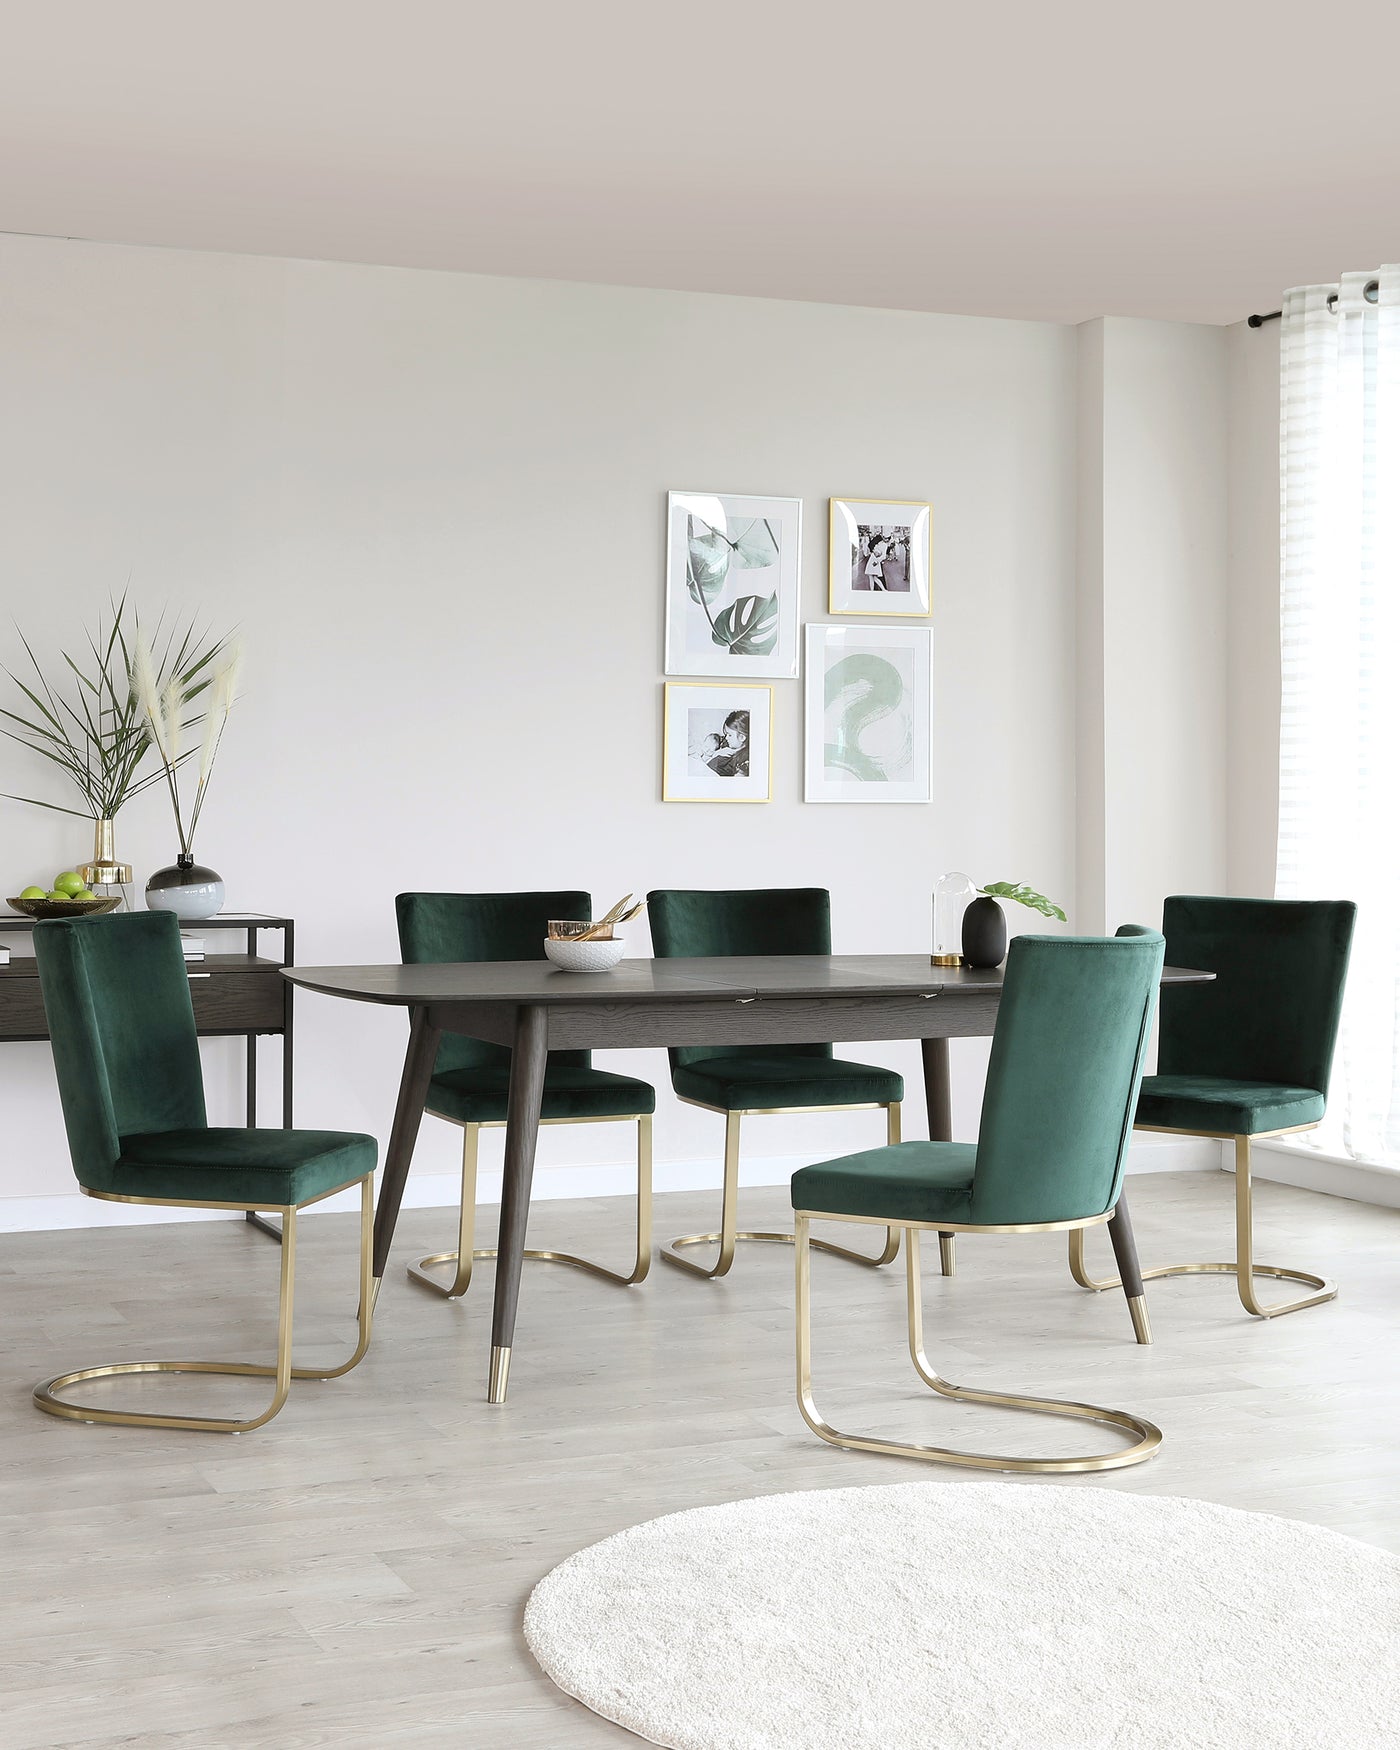 Elegant dining room setup featuring a modern dark wood dining table with sleek, straight lines and a set of six luxurious velvet upholstered chairs in a rich emerald green. The chairs have brass-finished metal cantilever bases that provide a stylish contrast to the wood, infusing a sophisticated touch to the contemporary design. A matching dark wood side table adorned with decorative vases complements the ensemble.